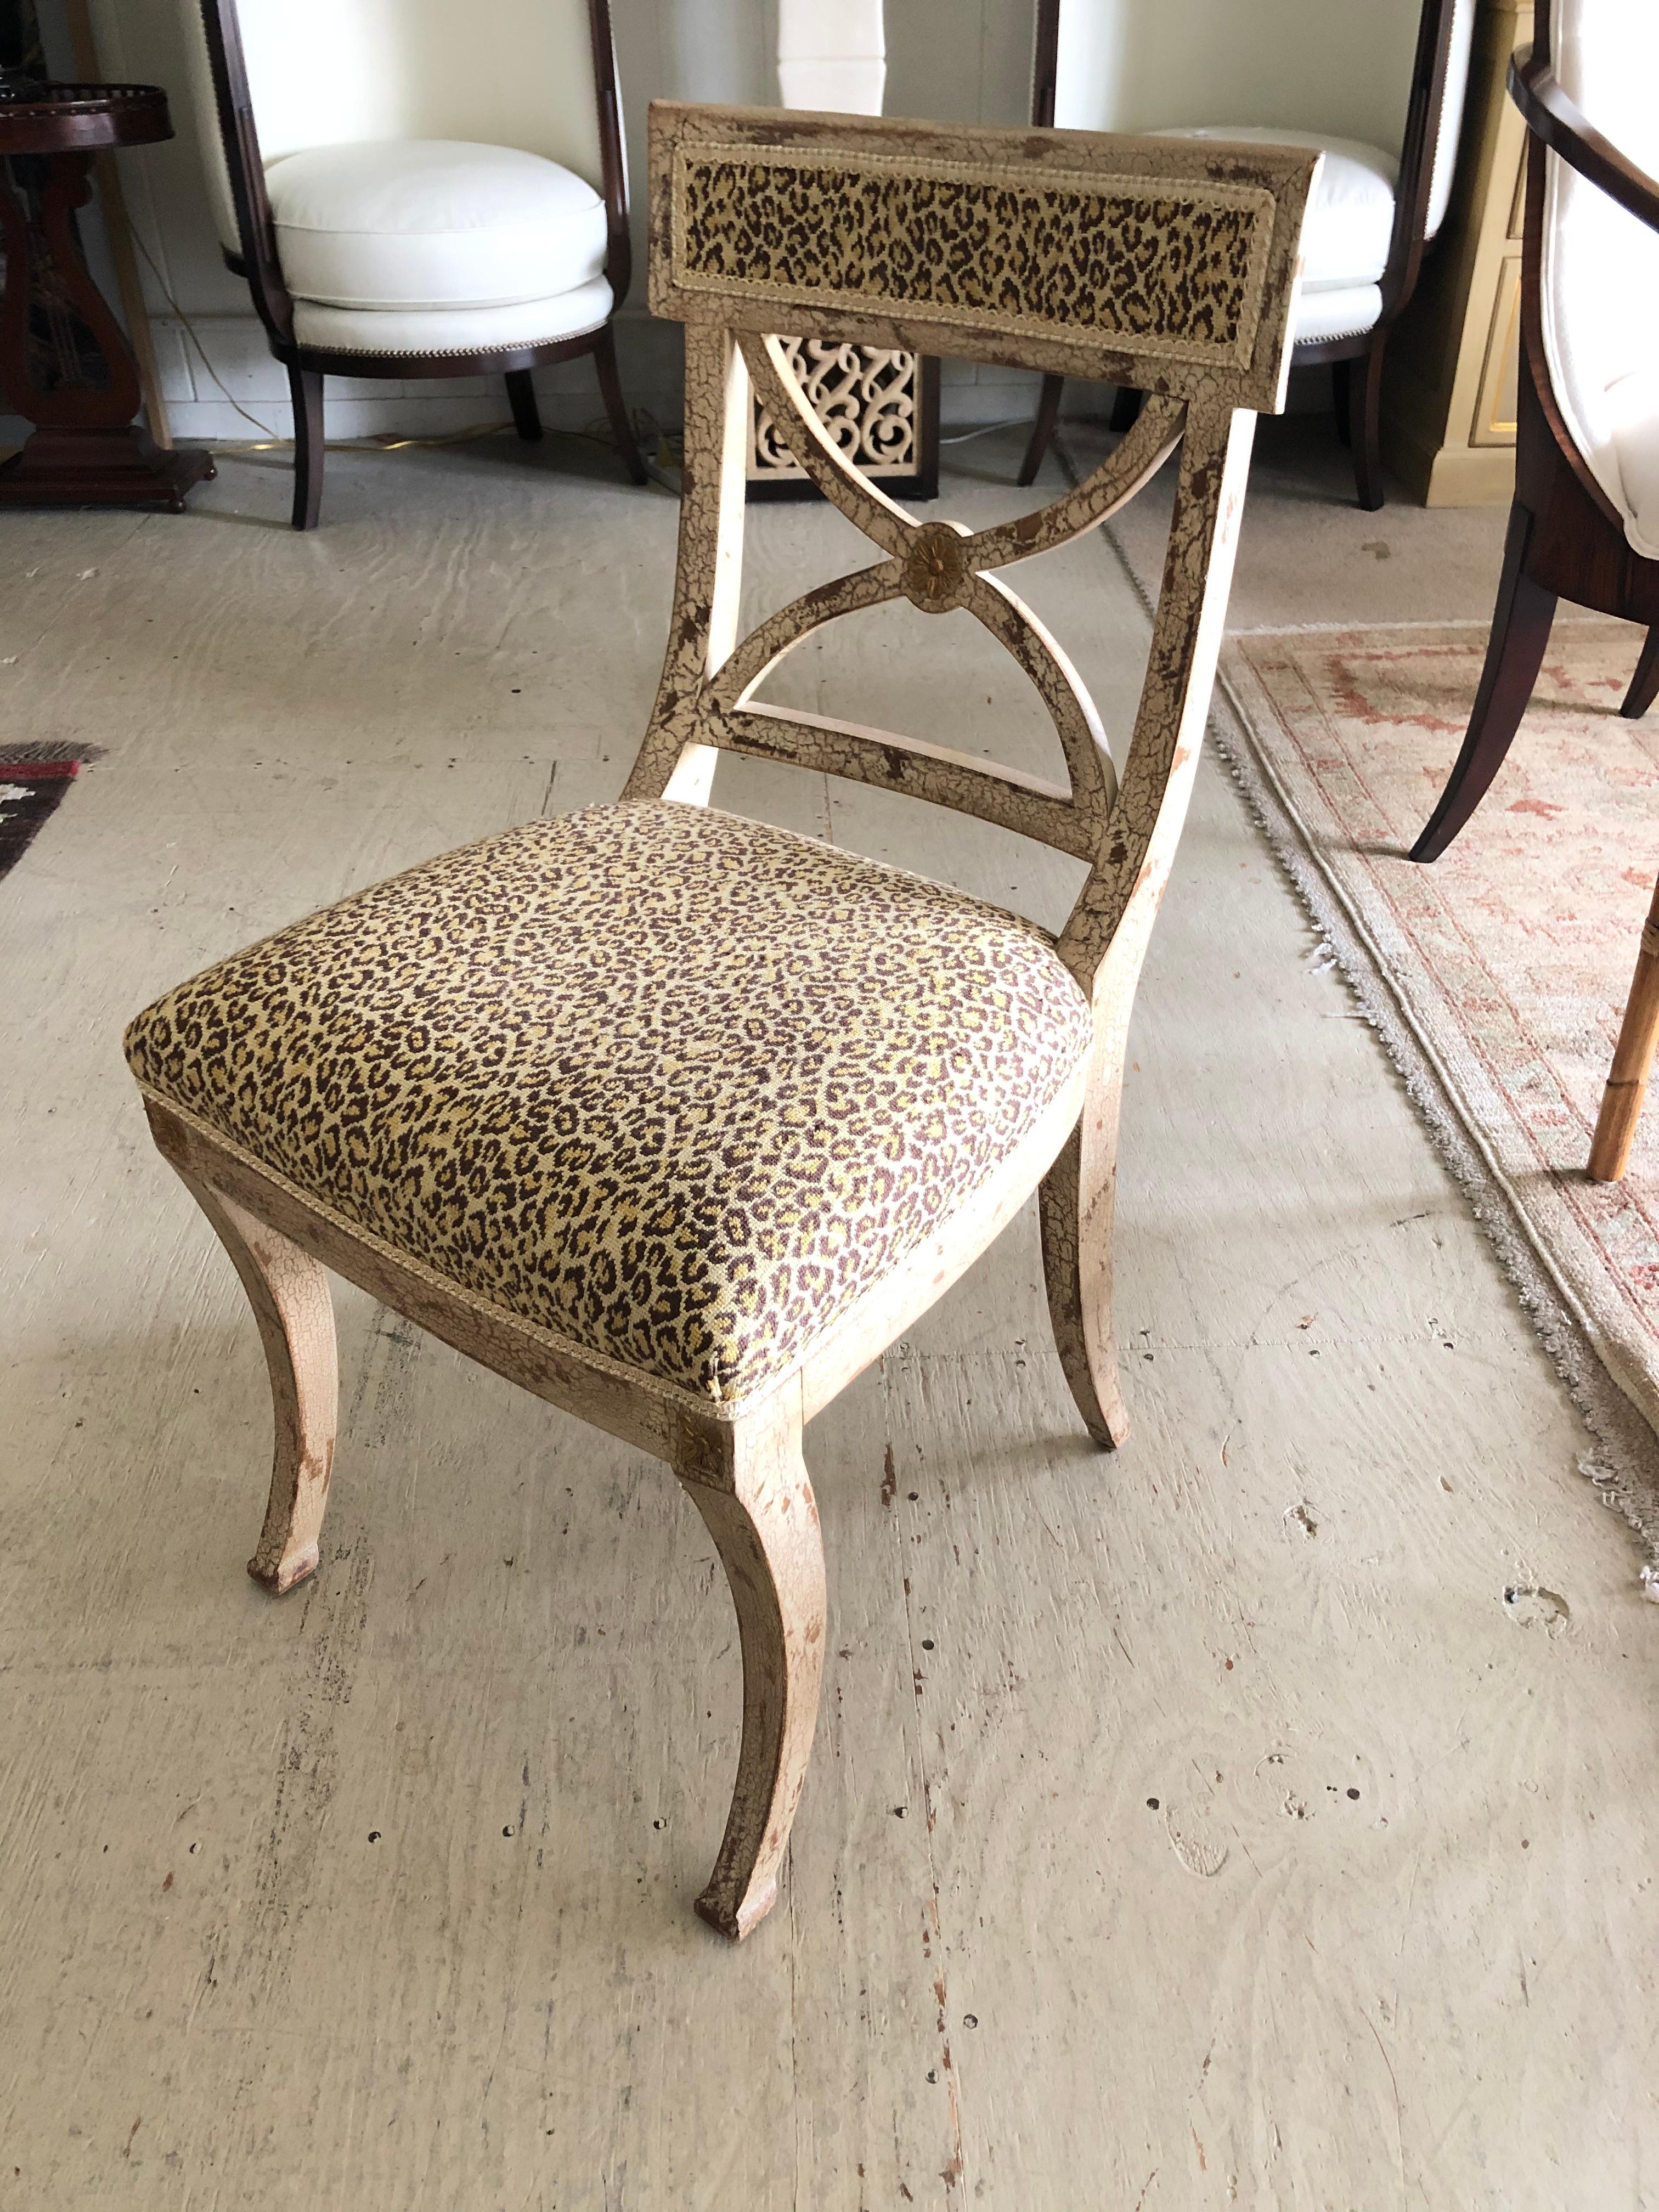 Contemporary Stylish Painted Distressed Desk Chair with Faux Leopard Upholstery